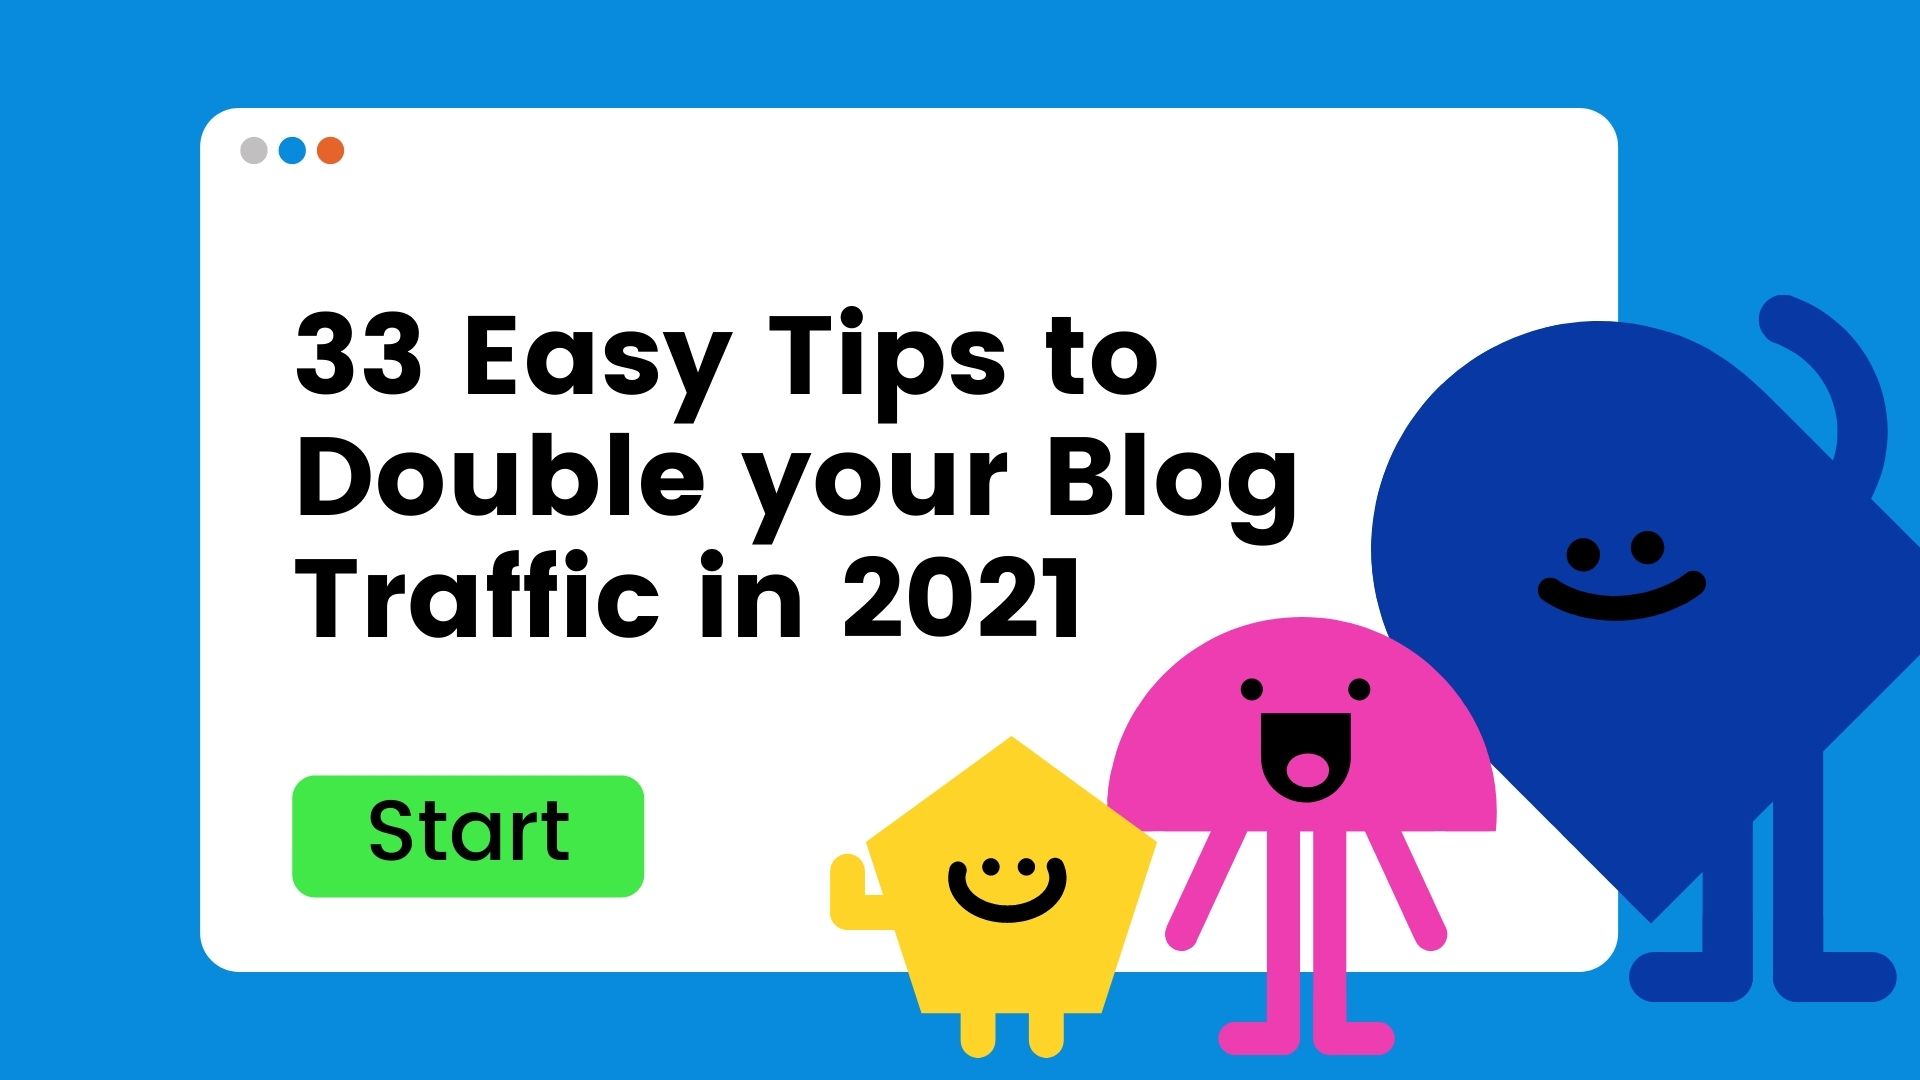 33-easy-tips-to-Double-your-blog-traffic-in-2021.jpg